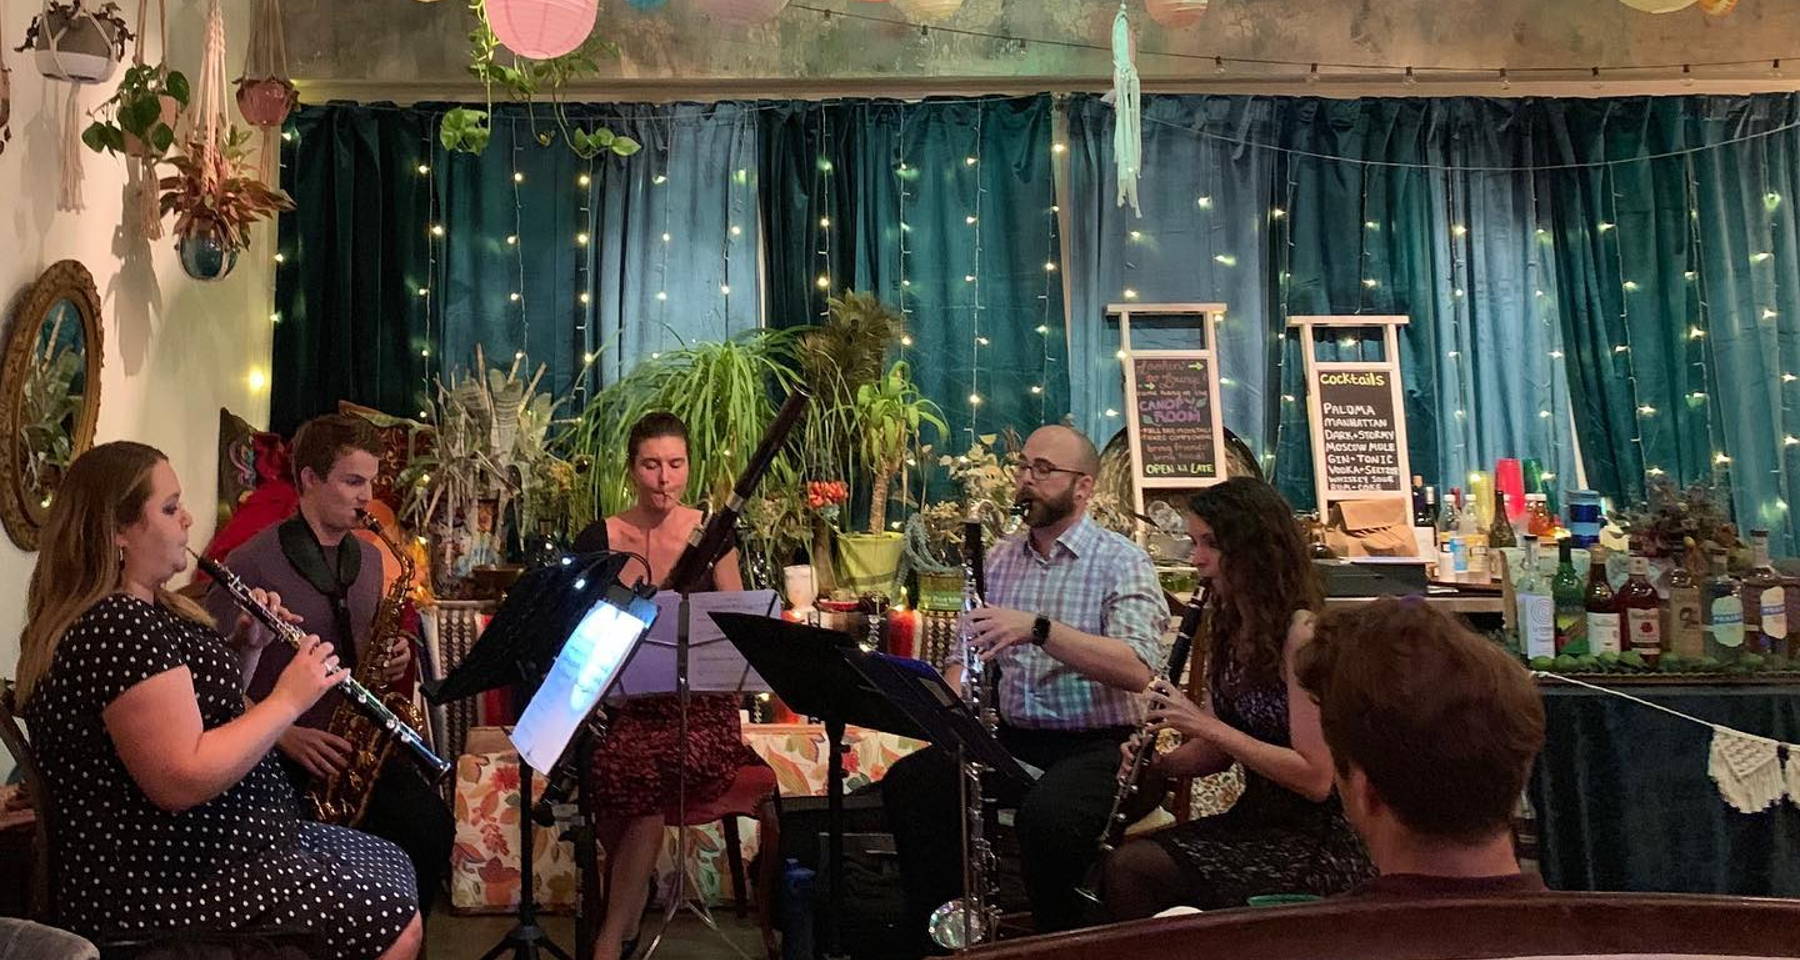 Kalliope Reed Quintet performs Bach, Rameau, and more!